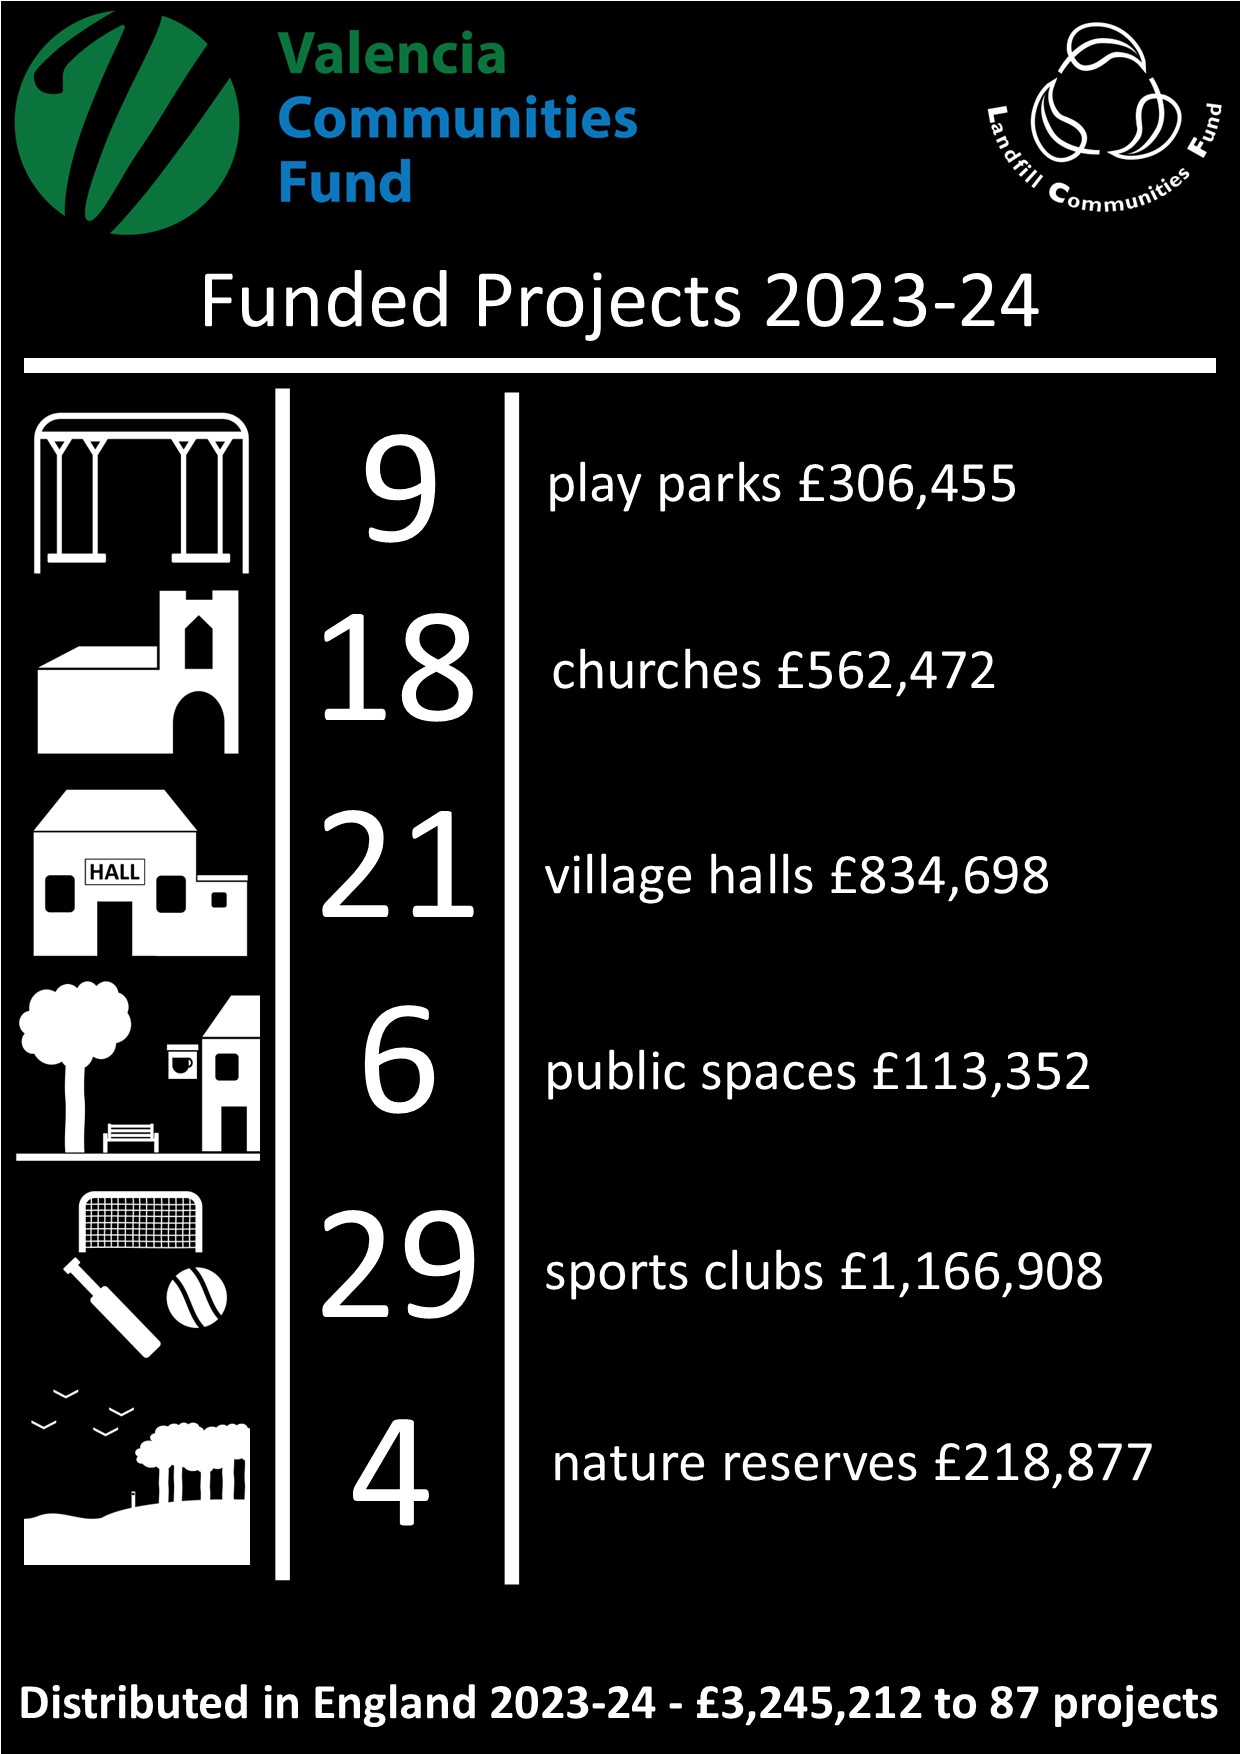 Pictoral and text summary of funded projects by facility